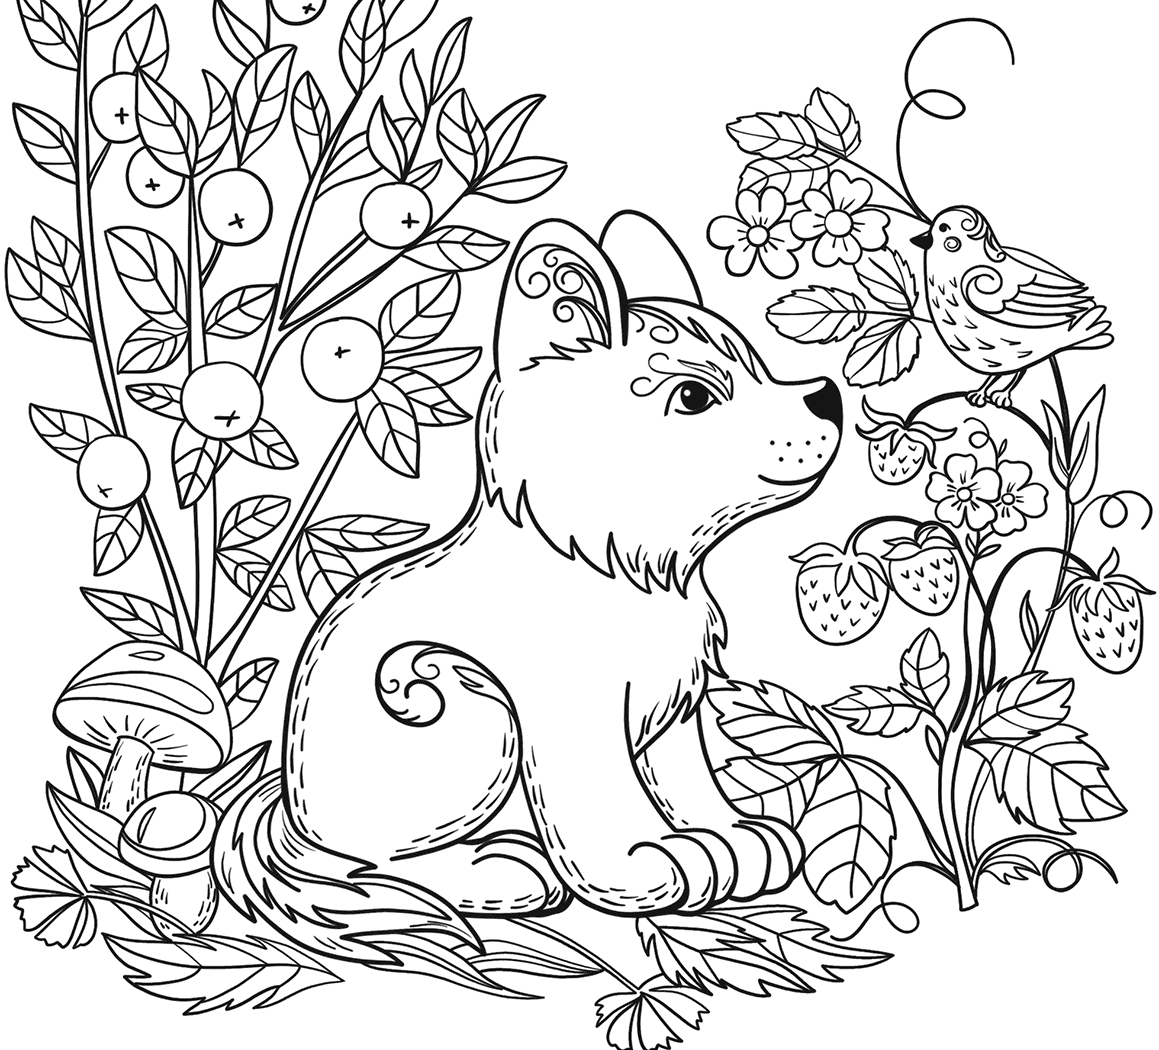 Incredible Free Coloring Pages Printable Animals Ideas